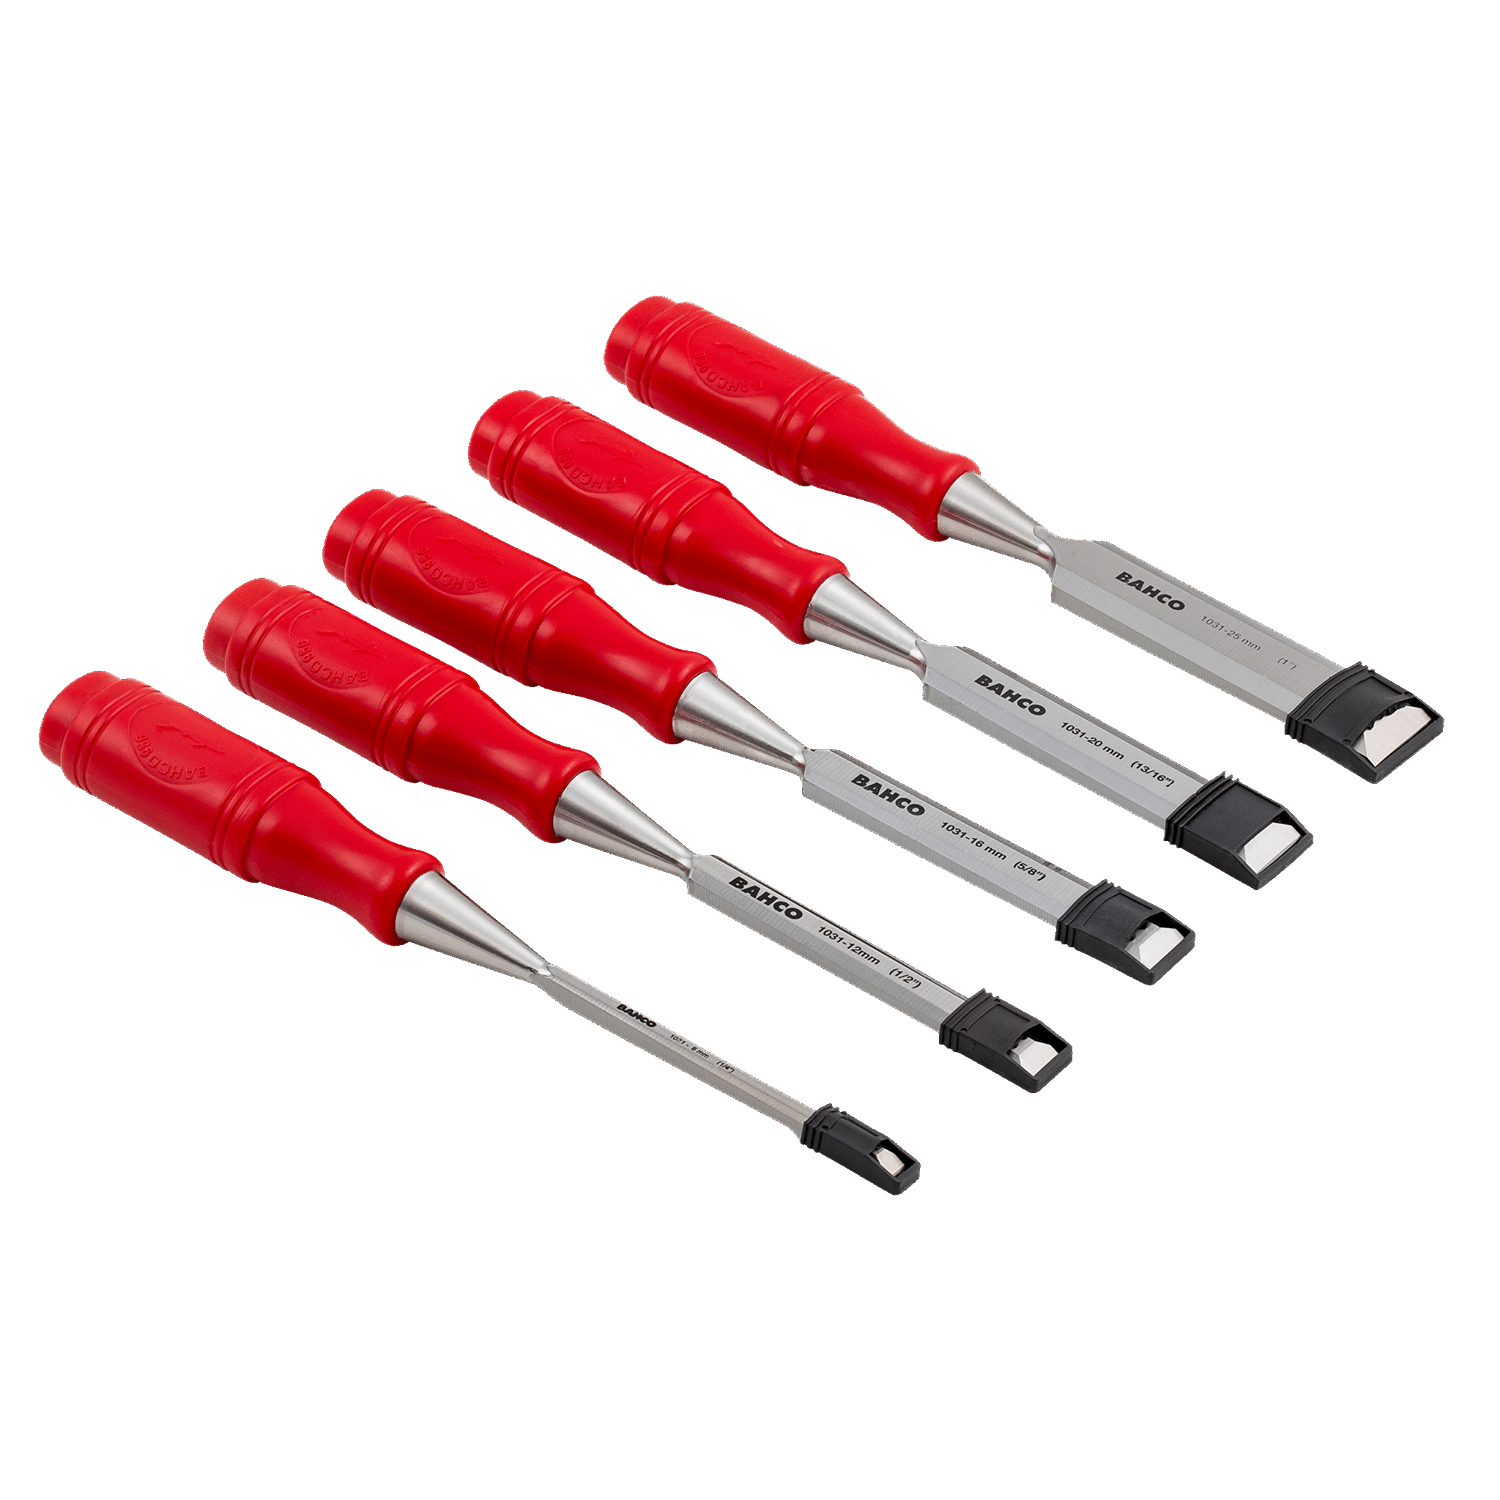 BAHCO 9883 Chisel Set with Polypropylene Handle - 5 Pcs/Blister - Premium Chisel Set from BAHCO - Shop now at Yew Aik.